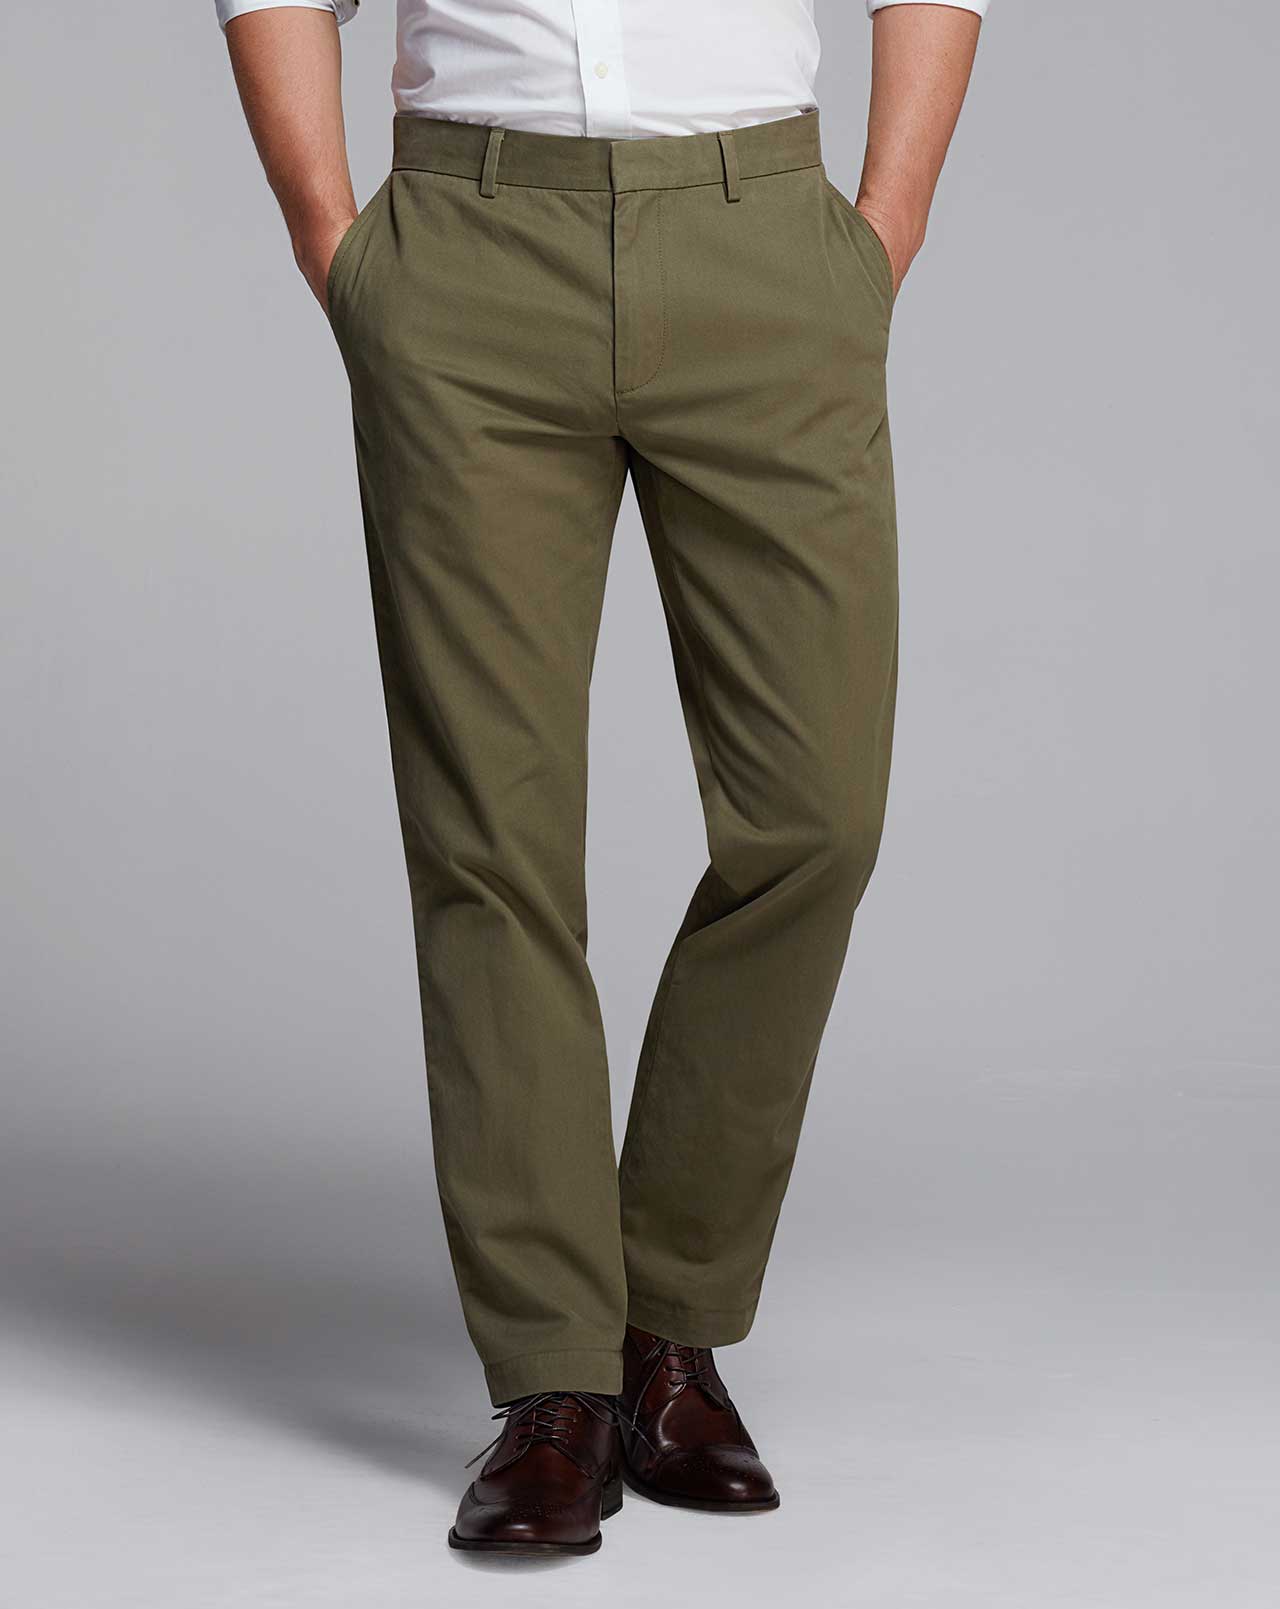 Fit Guide Men's Chinos - Aiden